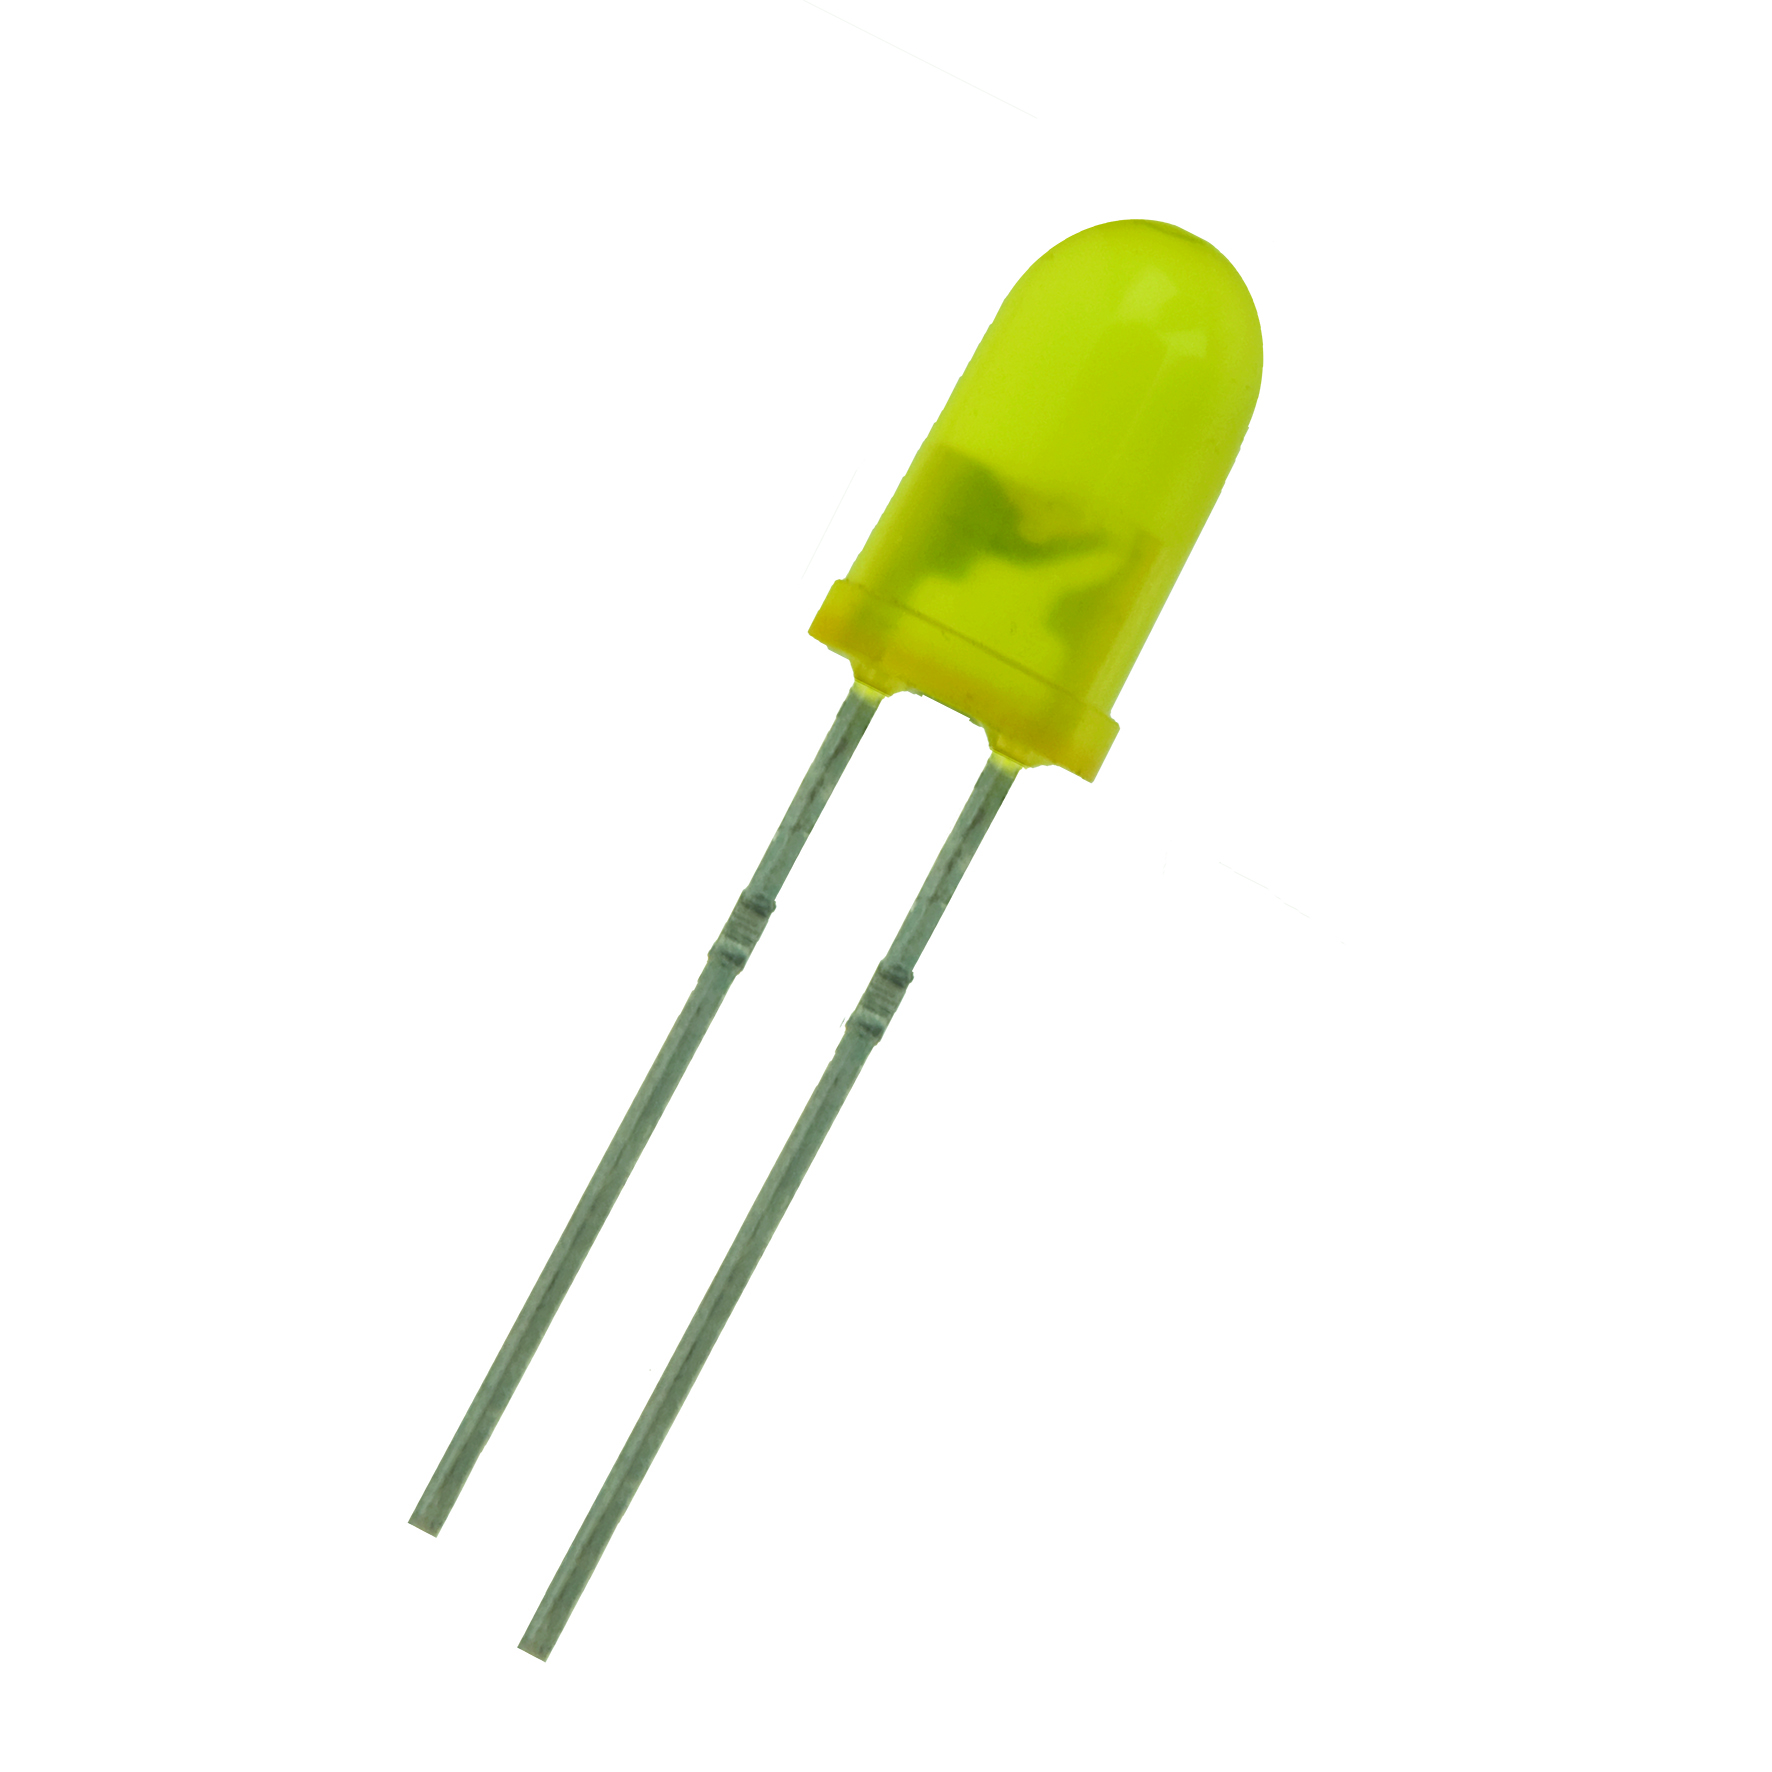 LED 5mm Yellow Diff Square 2.1V